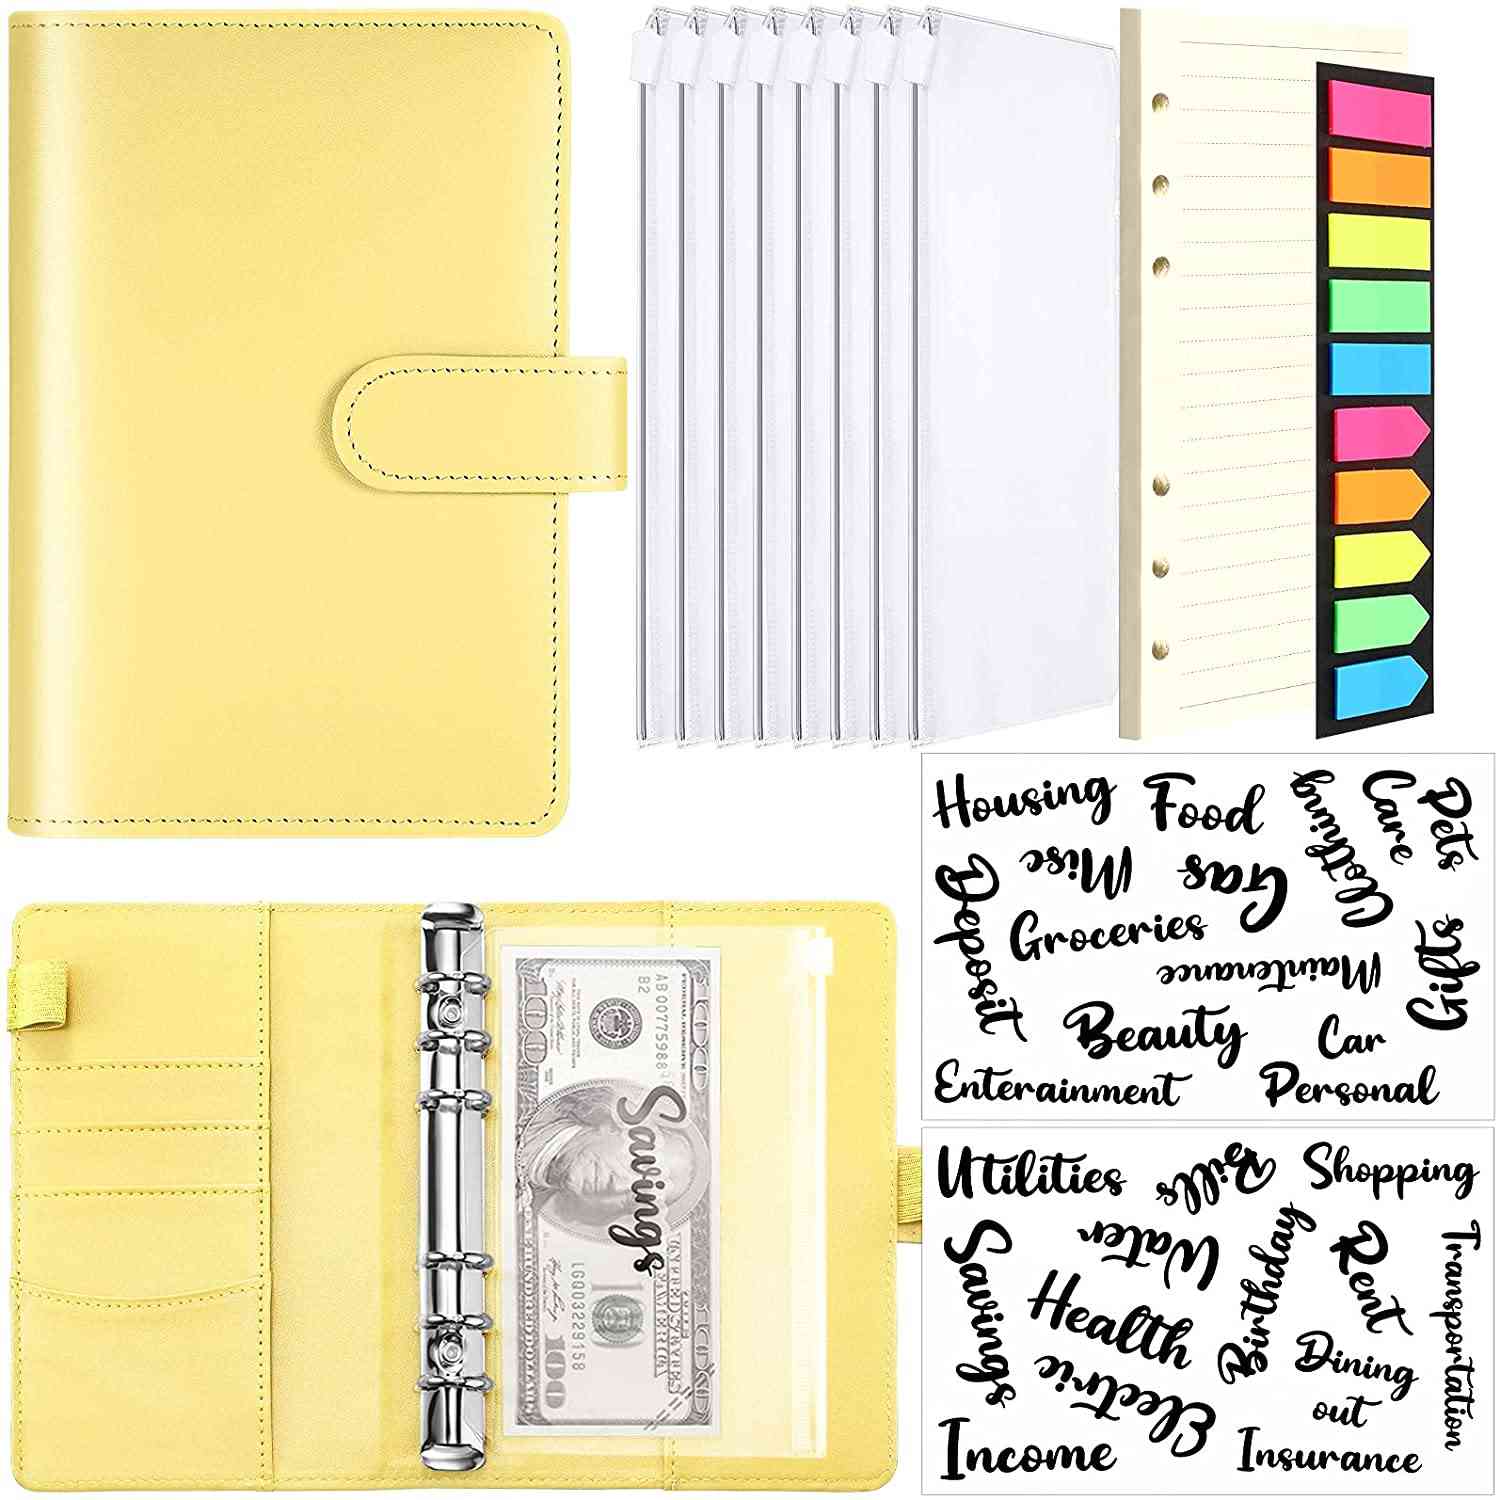 A6 Budget System With 26 Categories Sticker Cash Budget Label/ 8 Binder Pocket/ Loose Leaf Paper And Neon Page Makers For Saving